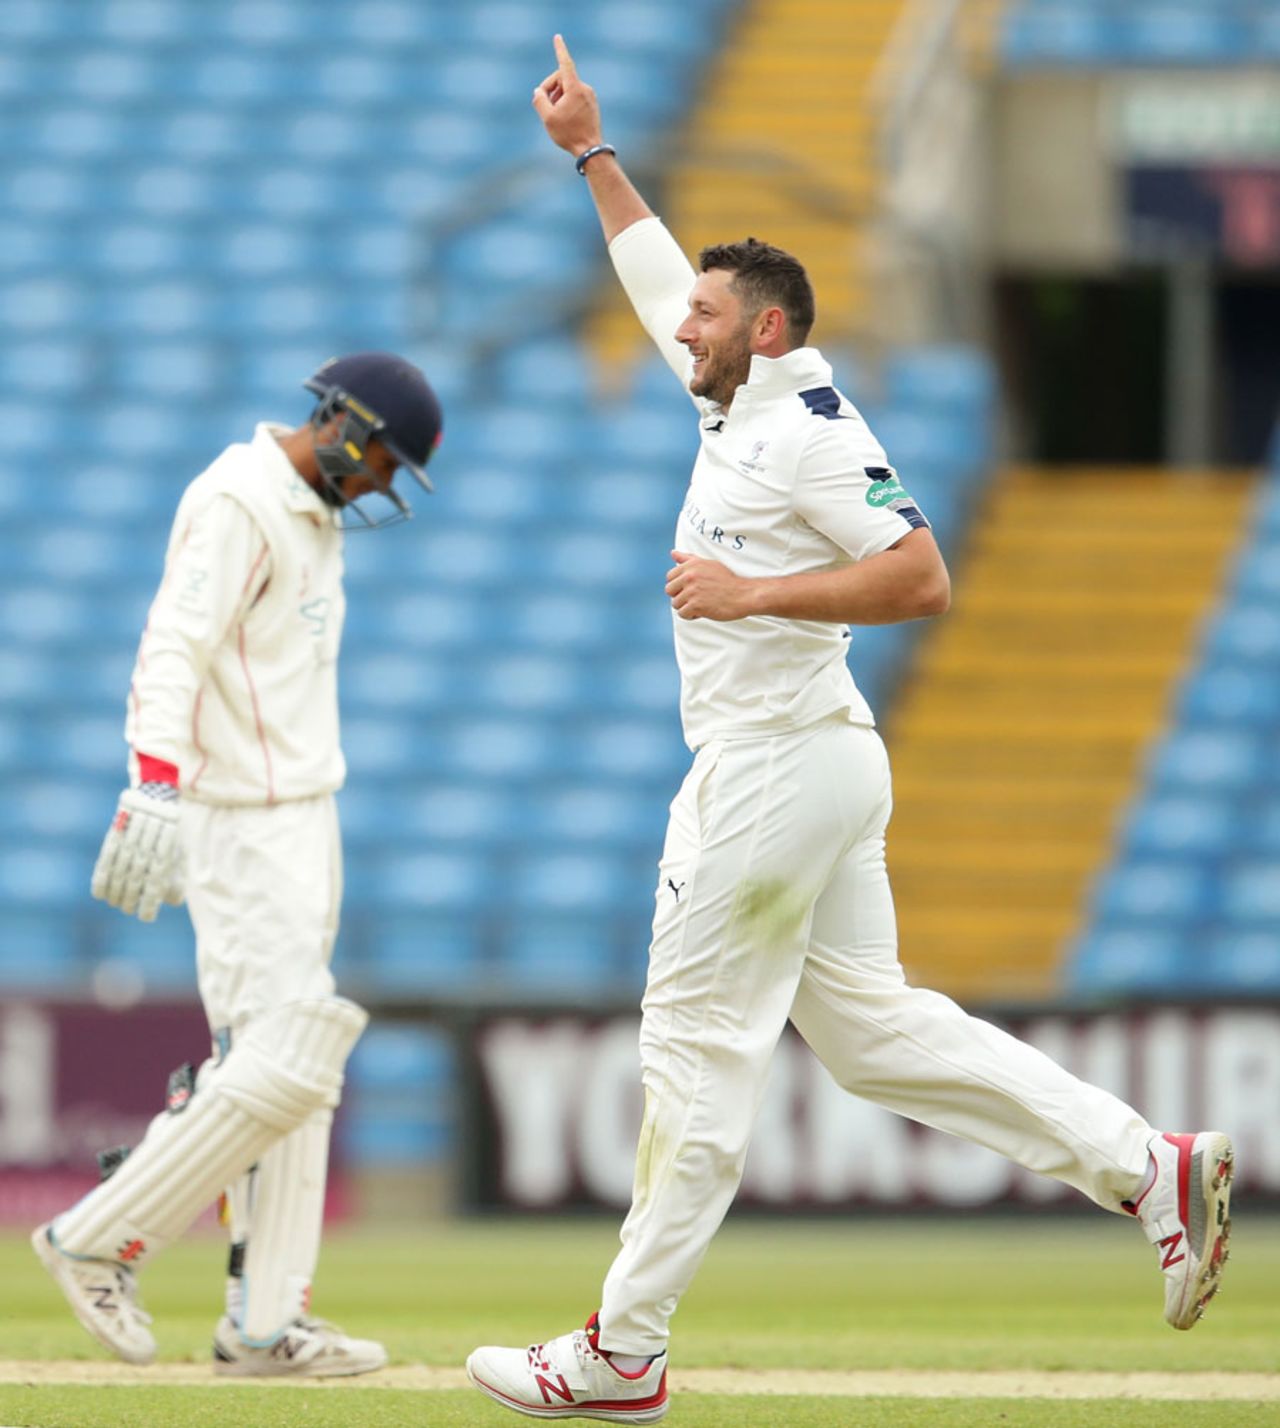 Tim Bresnan got rid of Haseeb Hameed, Yorkshire v Lancashire, County Championship, Division One, Headingley, 2nd day, May 30, 2016